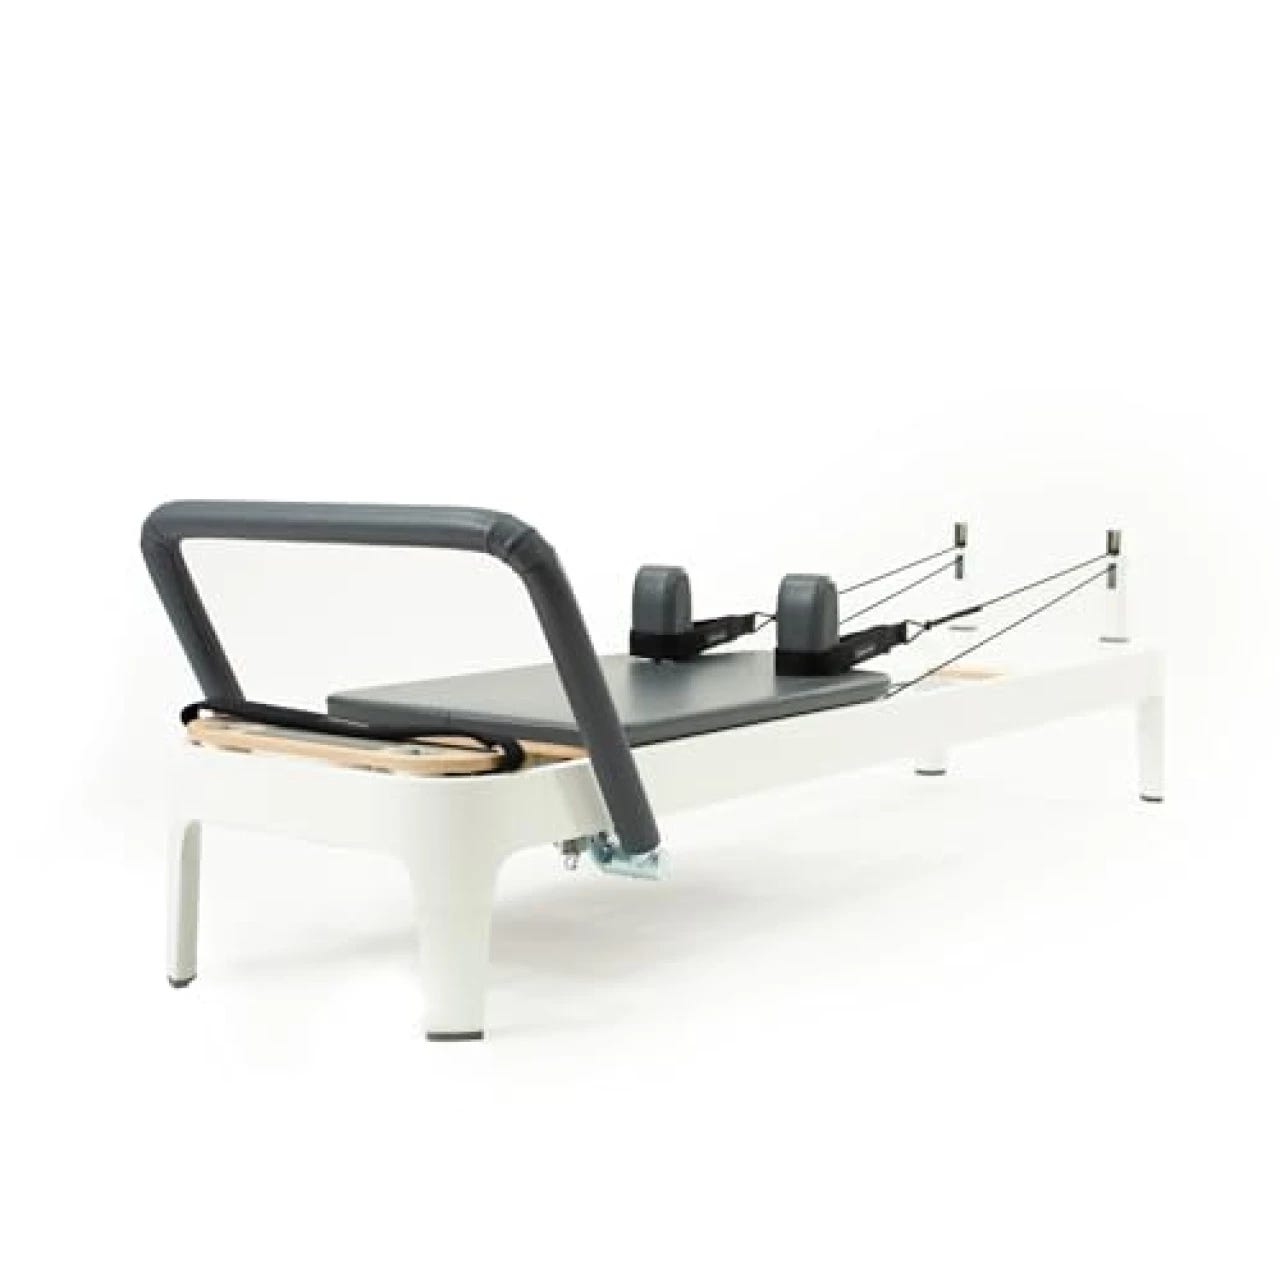 Dynamic Pilates Reformer Machines for Progressive Exercise Routines, by  Alma, Mar, 2024